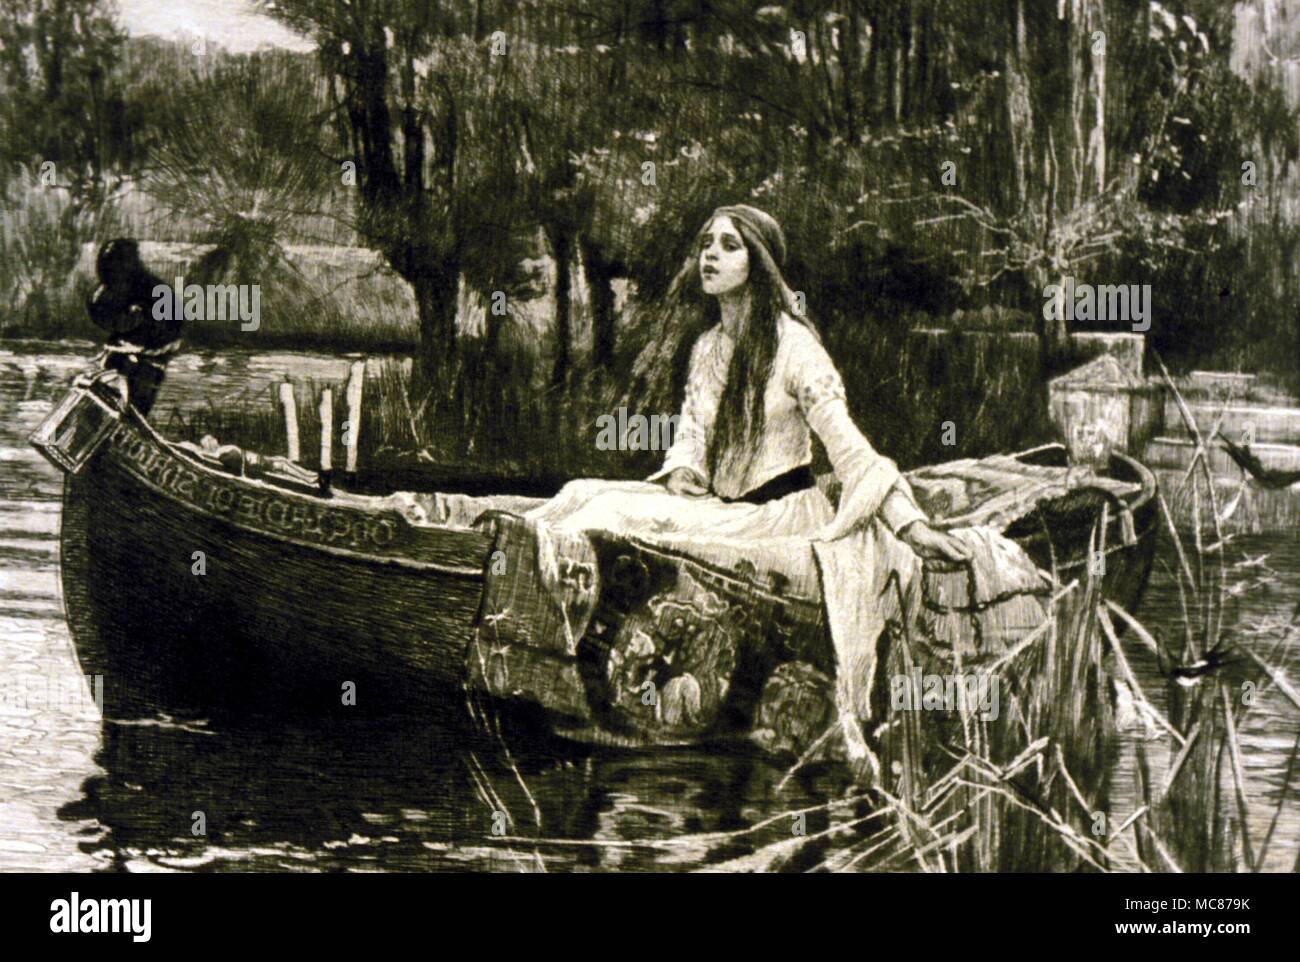 ARTHURIAN - LADY OF SHALOTT 'Lady of Shalott - engraving by Macbeth-Raeburn after the painting by Waterhouse, 1889. Stock Photo